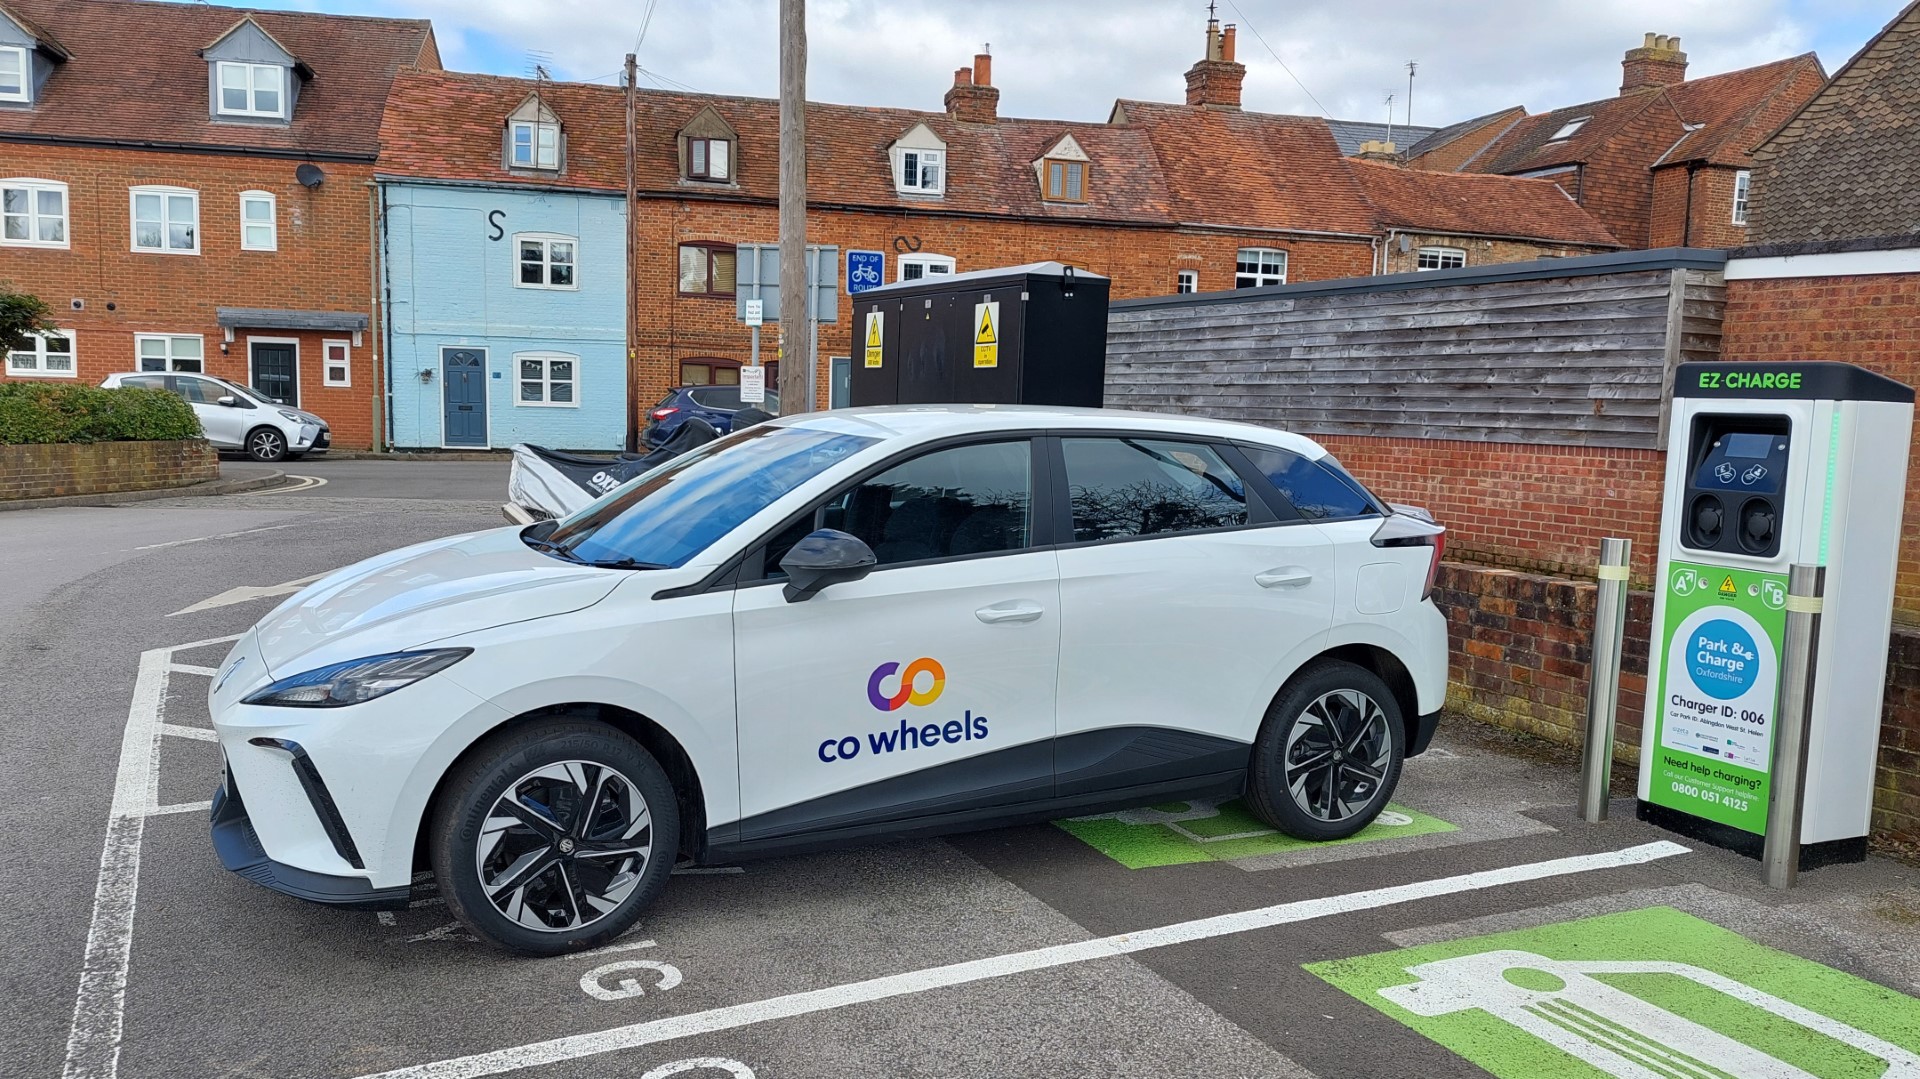 Picture of Co-Wheels car plugged into a charger